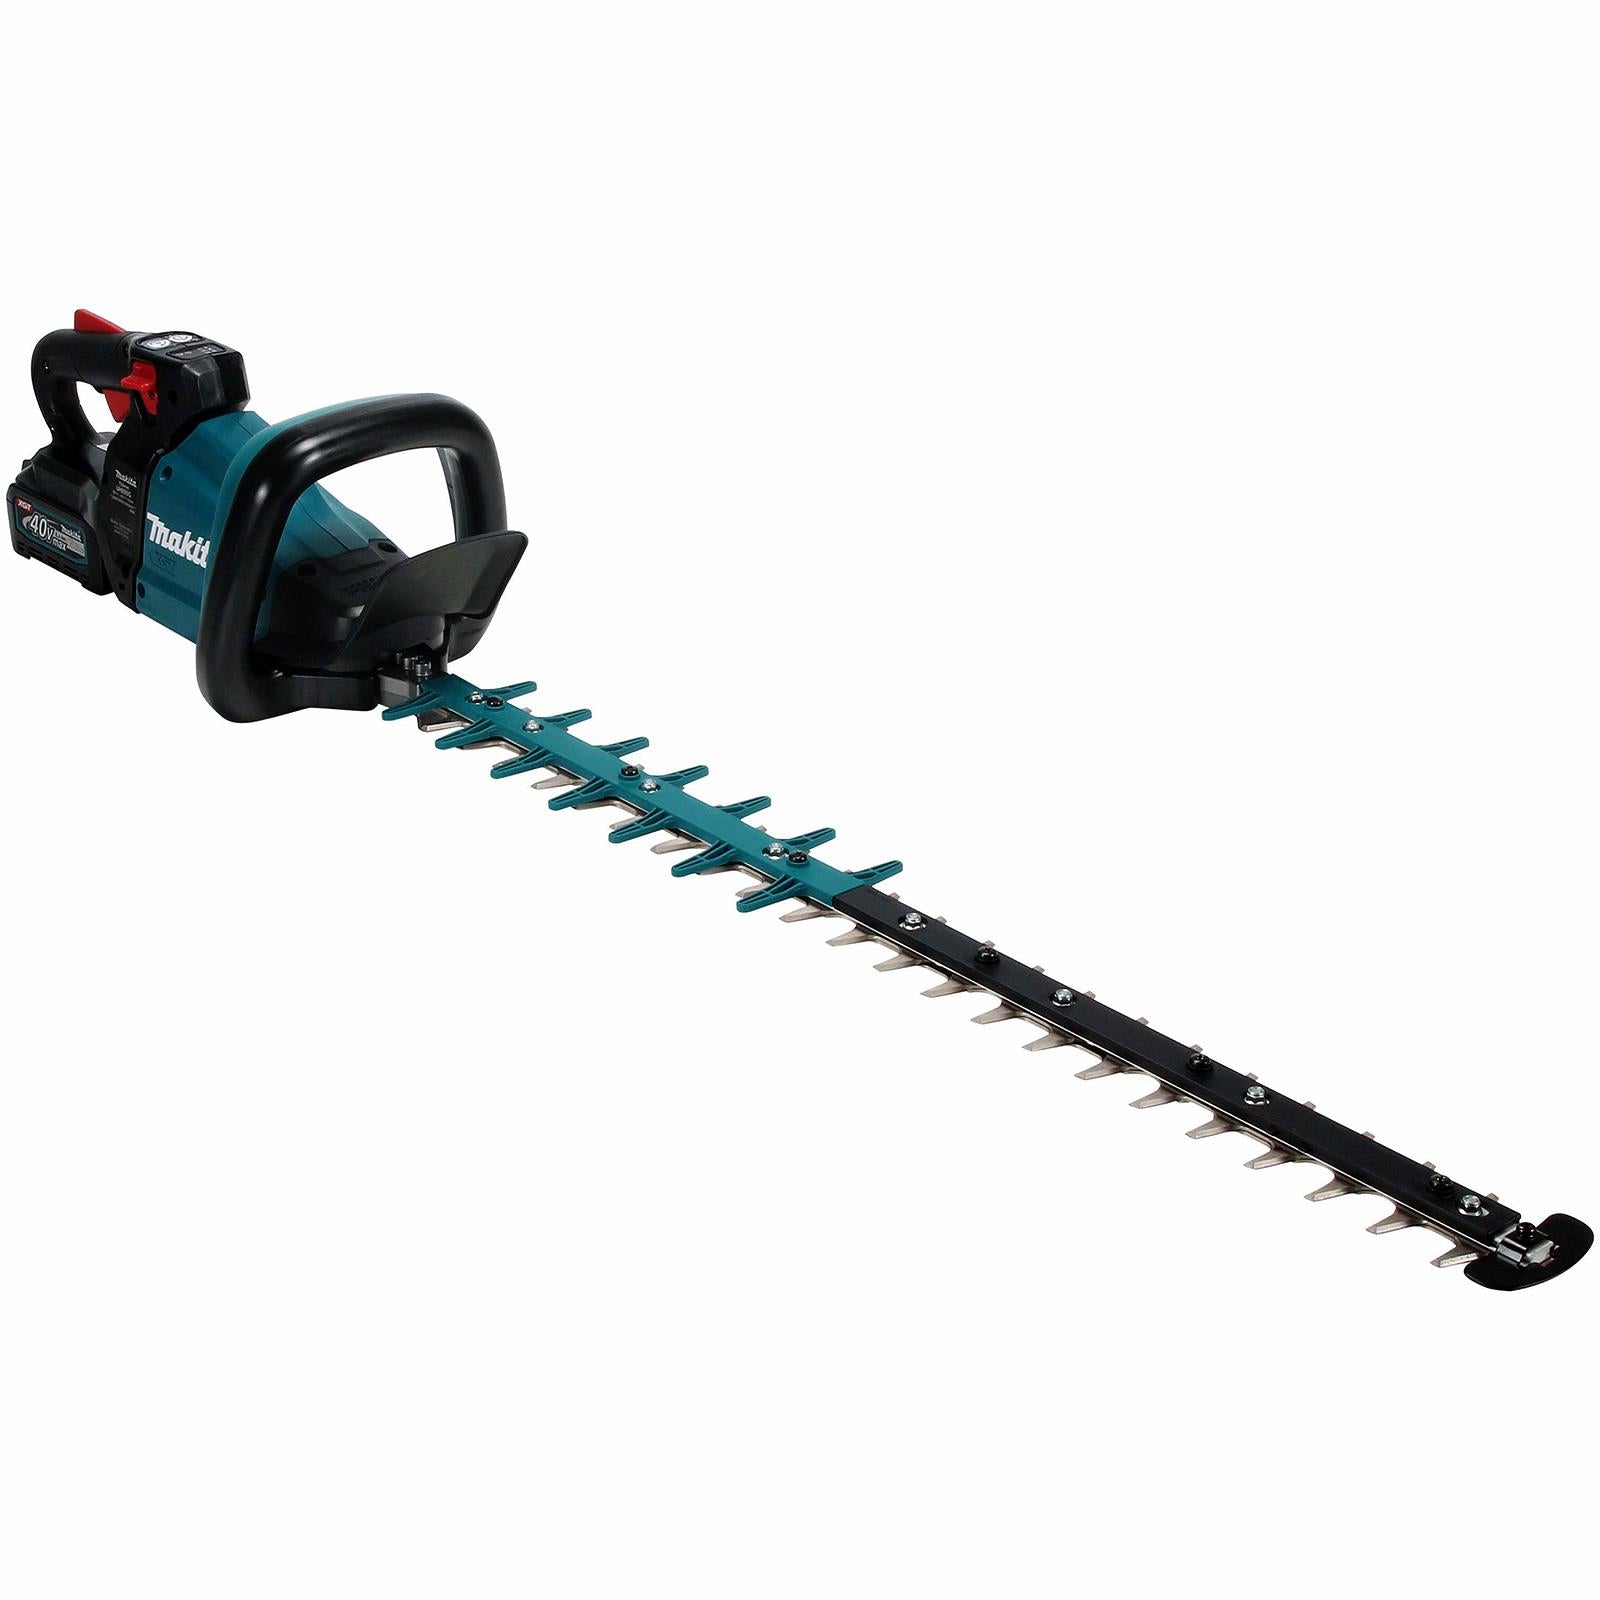 Makita Hedge Trimmer Kit 75cm 40V XGT Li-ion Brushless Cordless 2 x 2.5Ah Battery and Rapid Charger Garden Bush Cutter Cutting UH005GD201